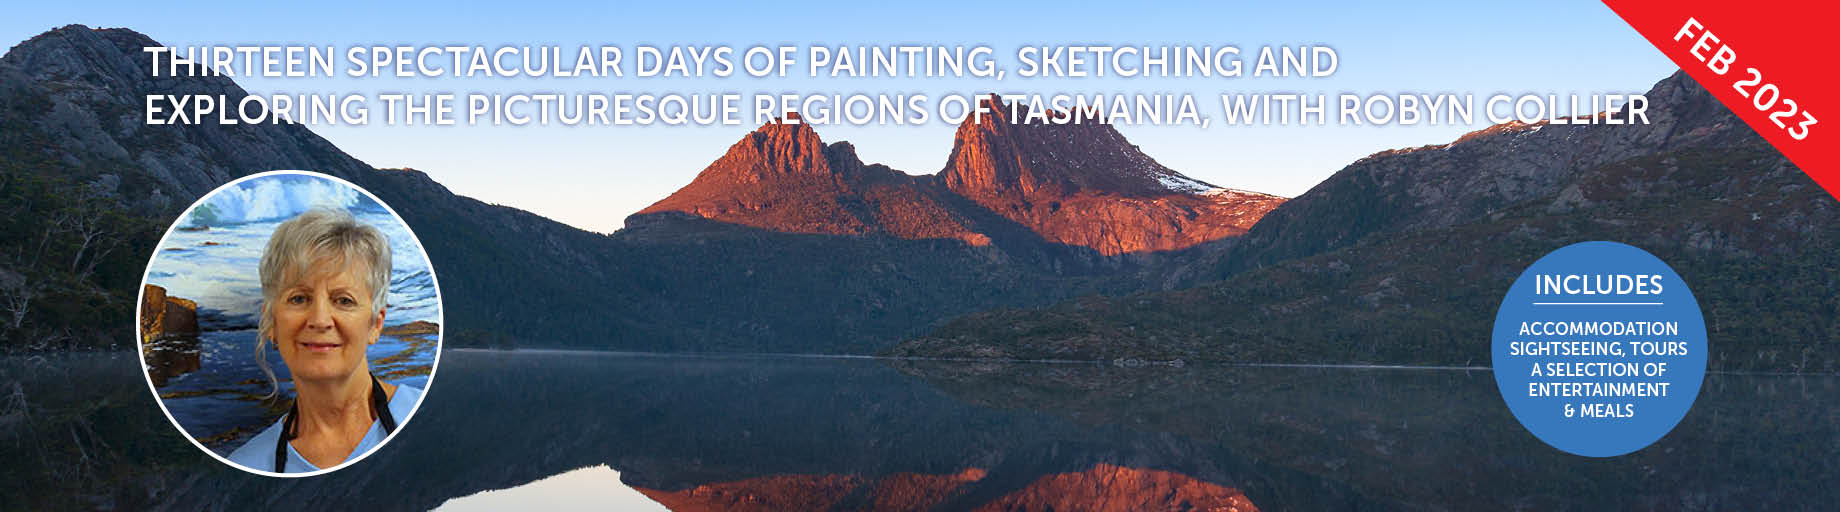 Tasmania Painting Workshop with Robyn Collier